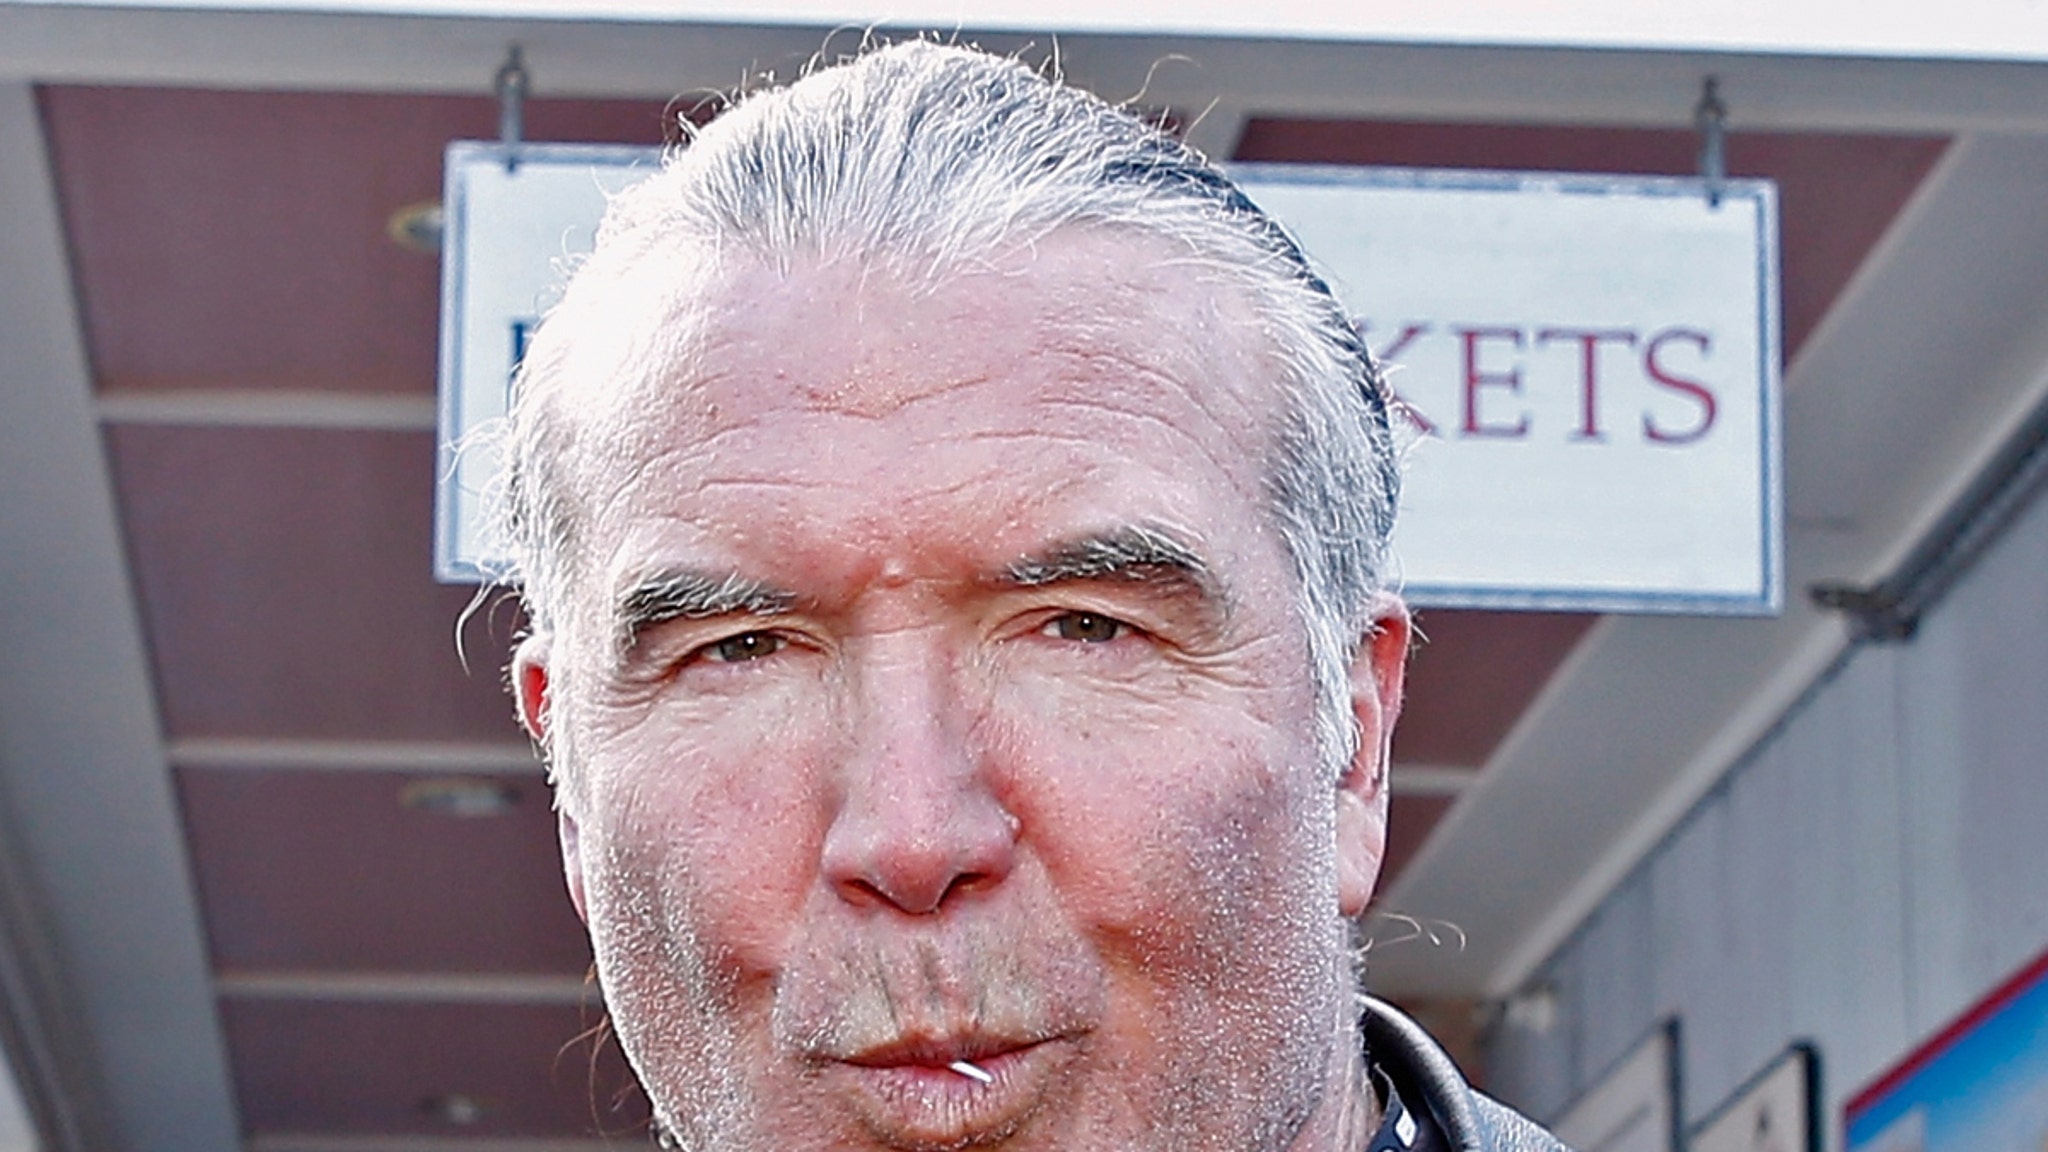 WWE Star Scott Hall On Life Support After Hip Surgery